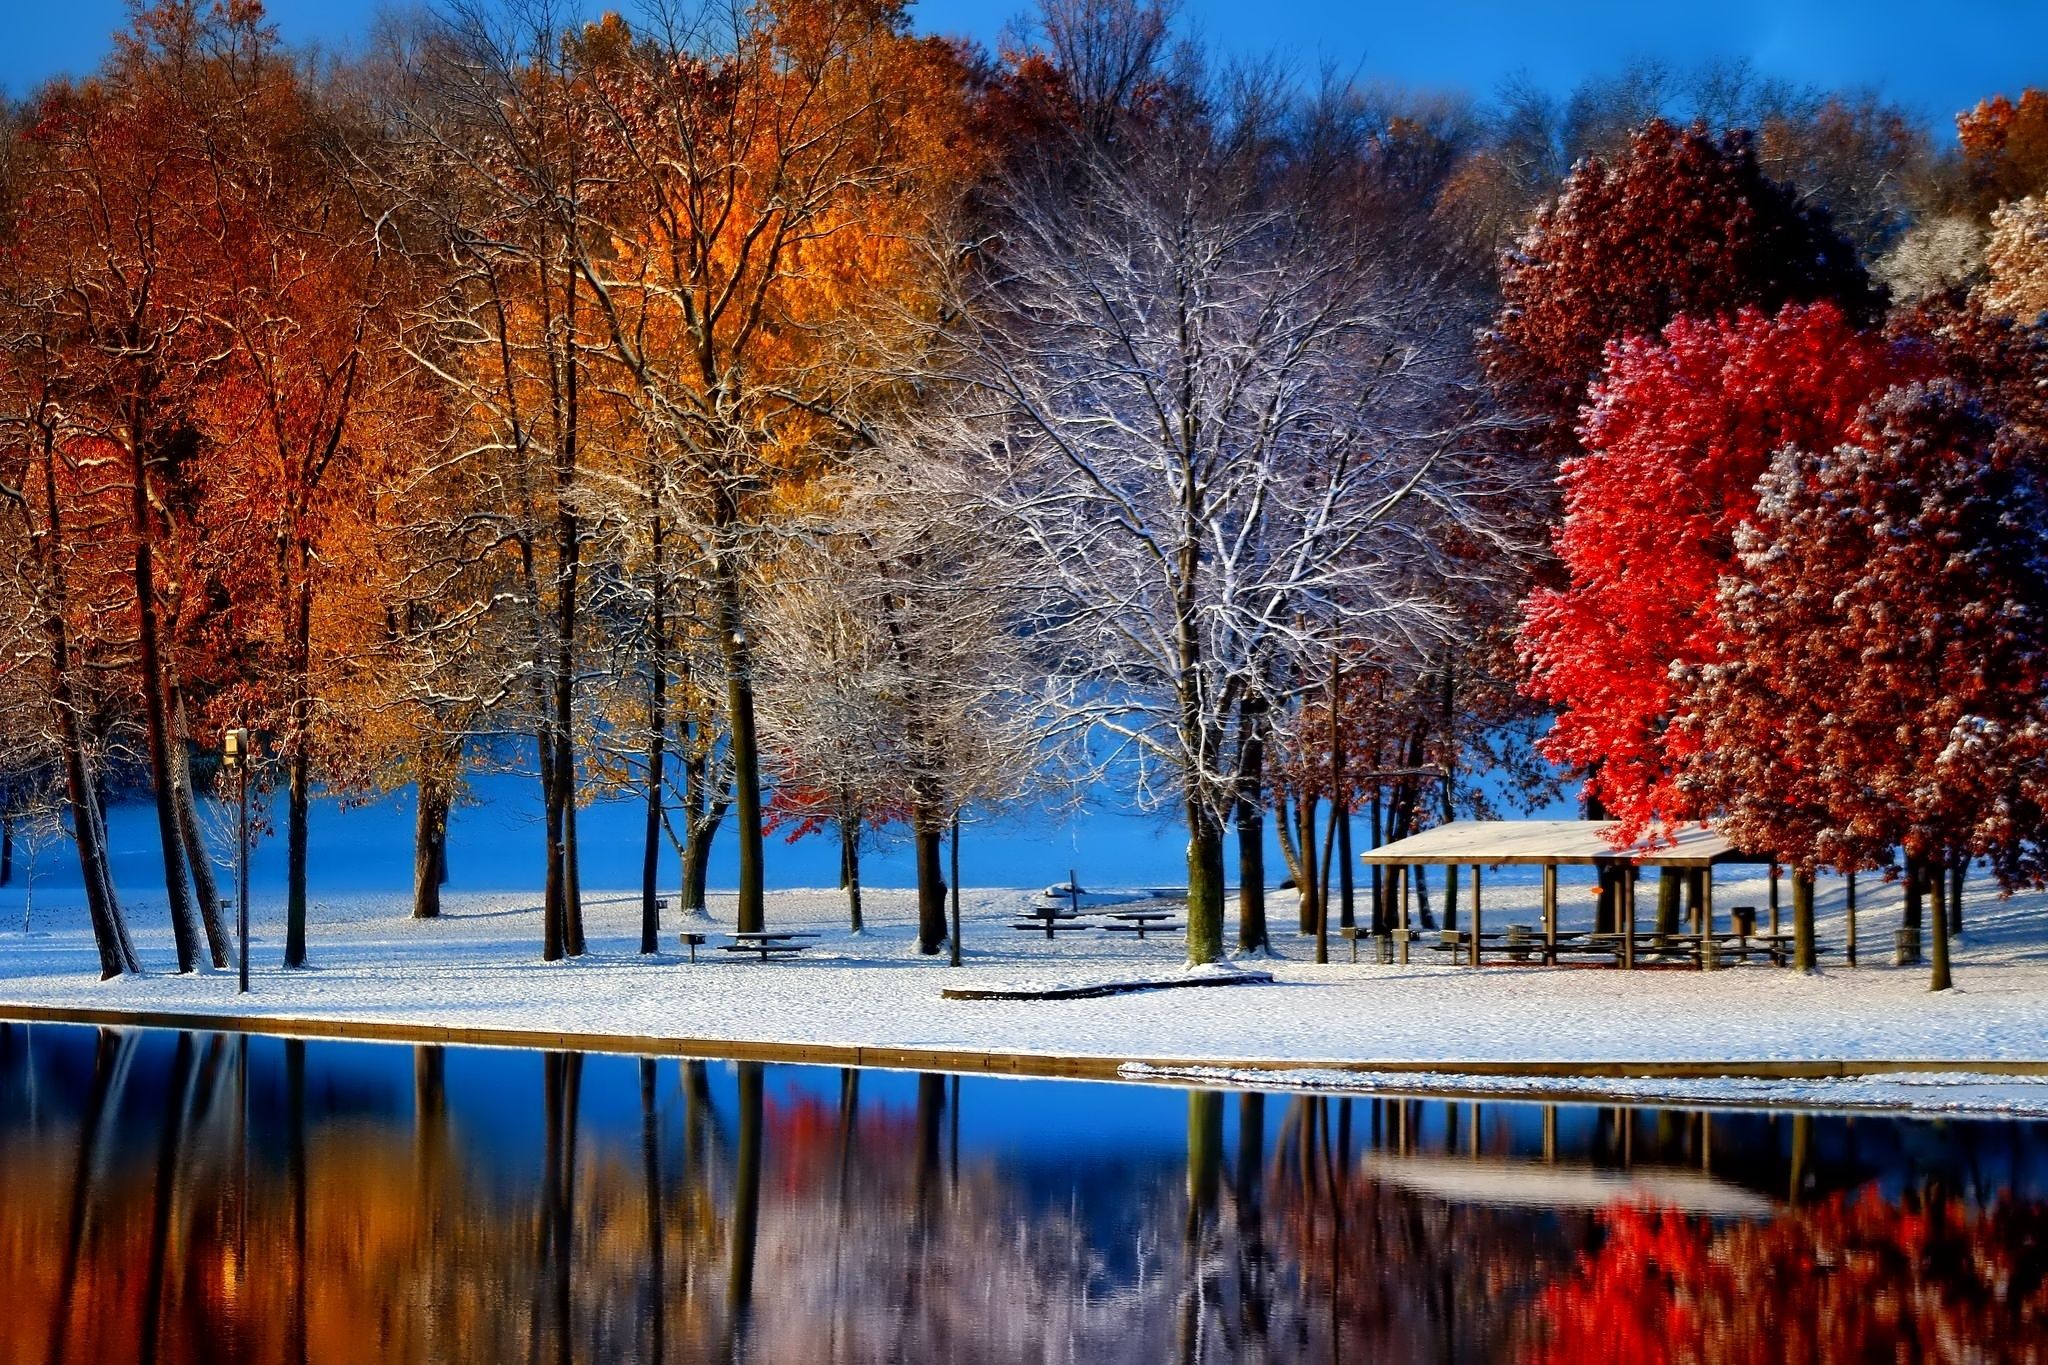 Wallpaper. Winter. photo. picture. late autumn, Park, the pond, trees, snow